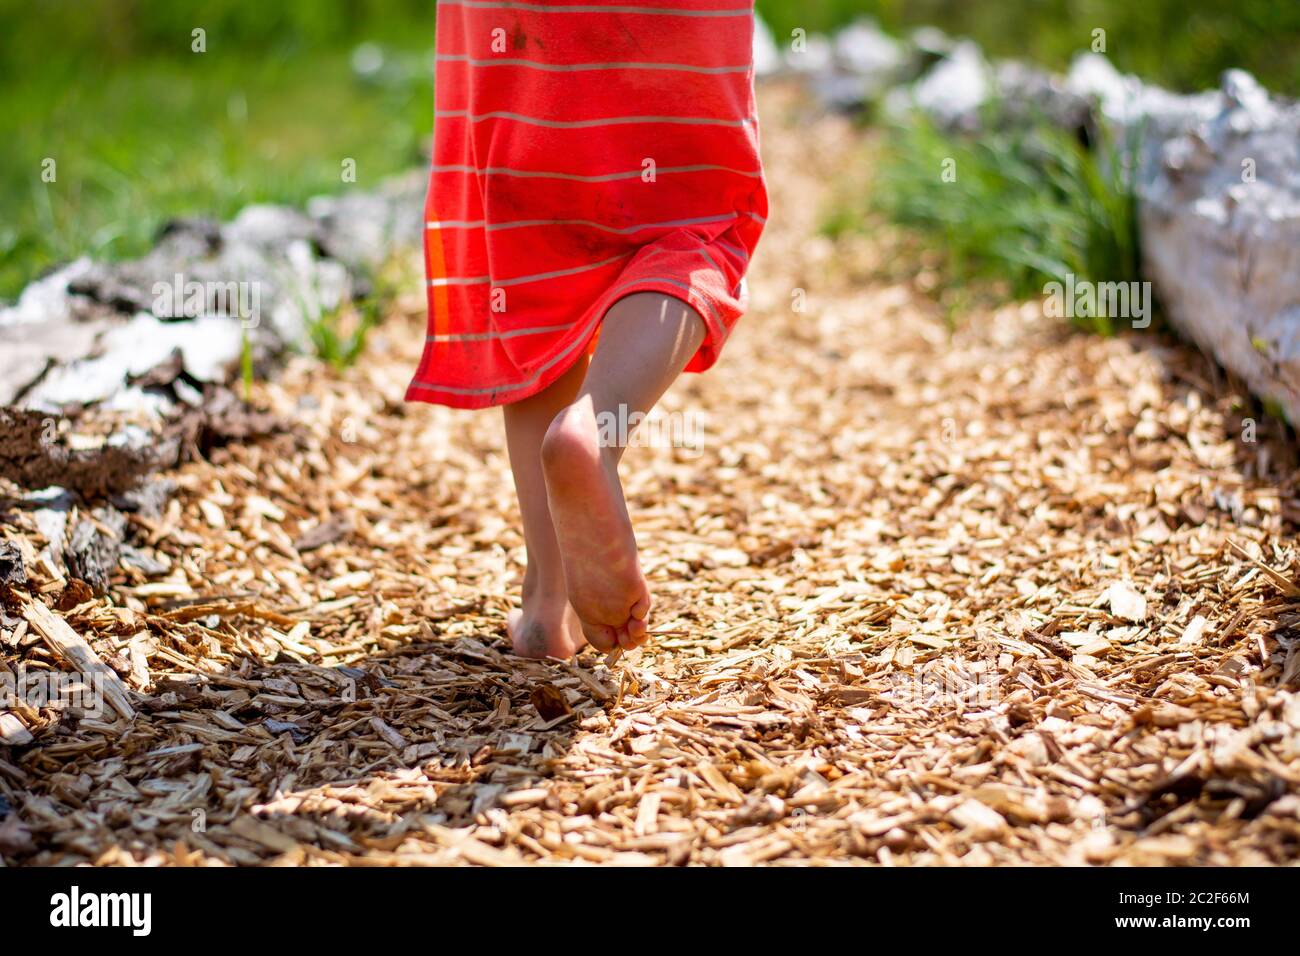 Girl in summer dress. Child girl feet walking barefoot on a path with wood chips. Healthy happy lifestyle, carefree childhood. Freedom concept. Stock Photo